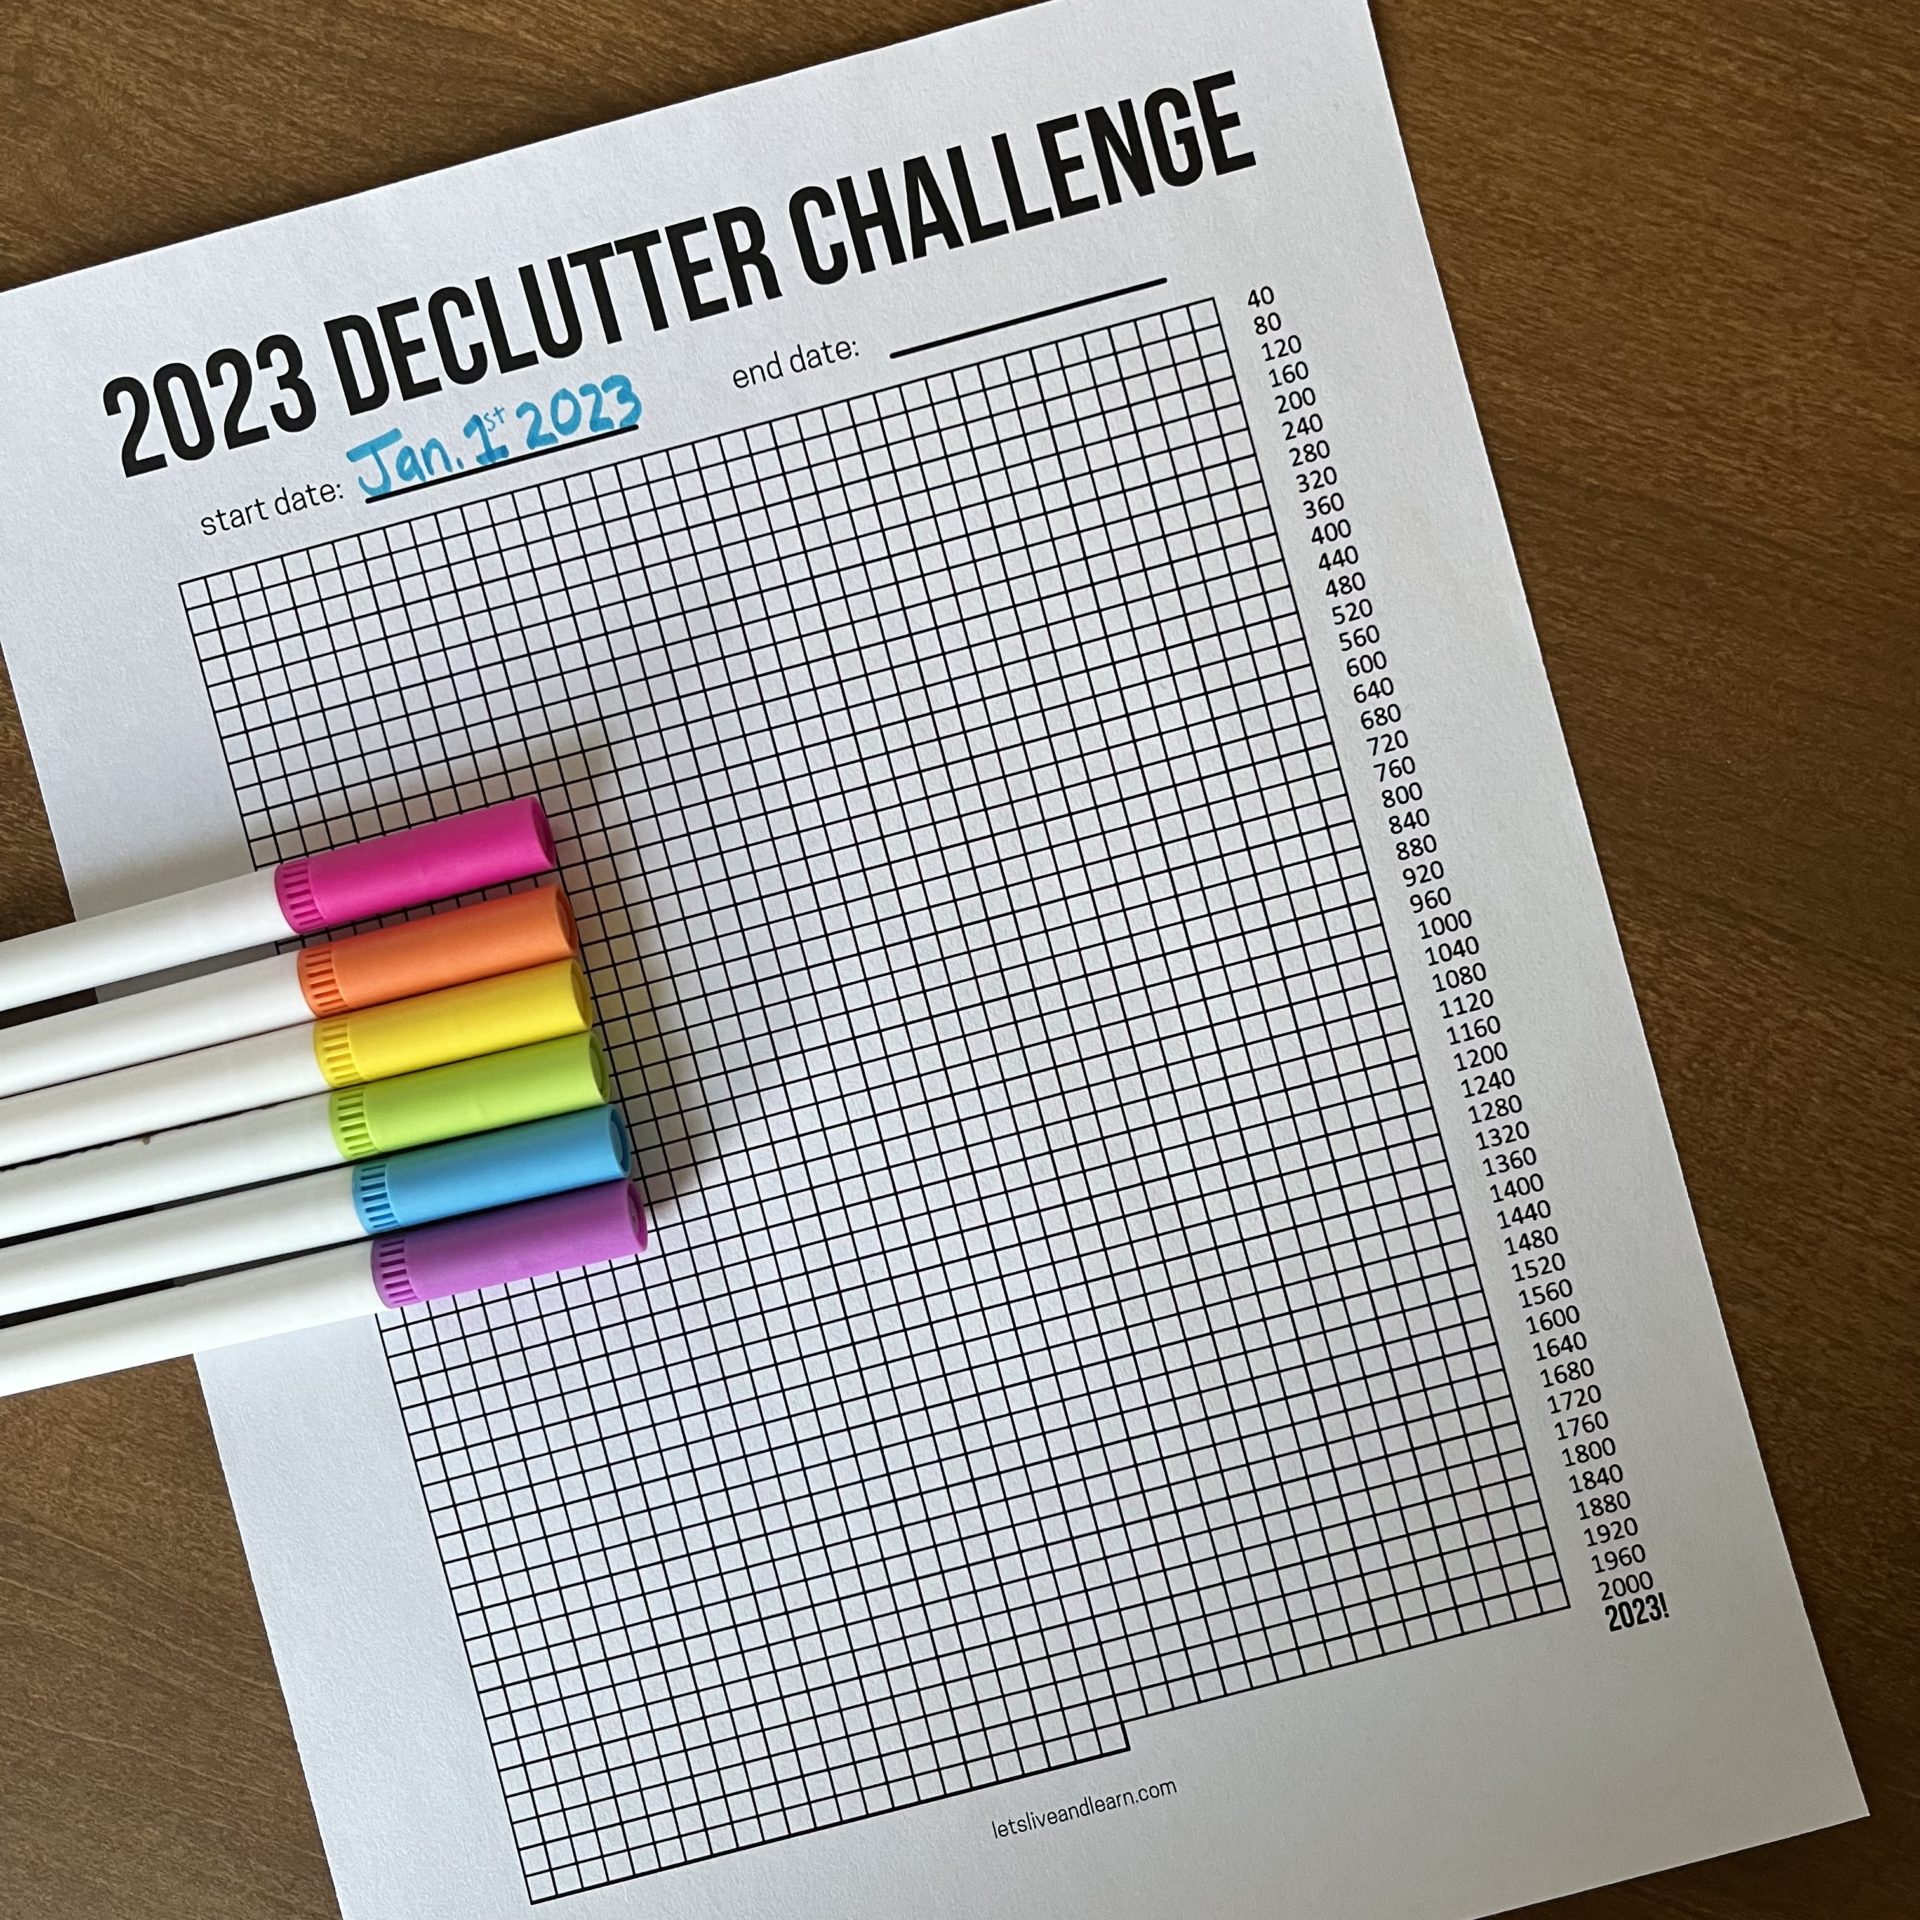 life-as-you-live-it-30-days-of-decluttering-in-2020-declutter